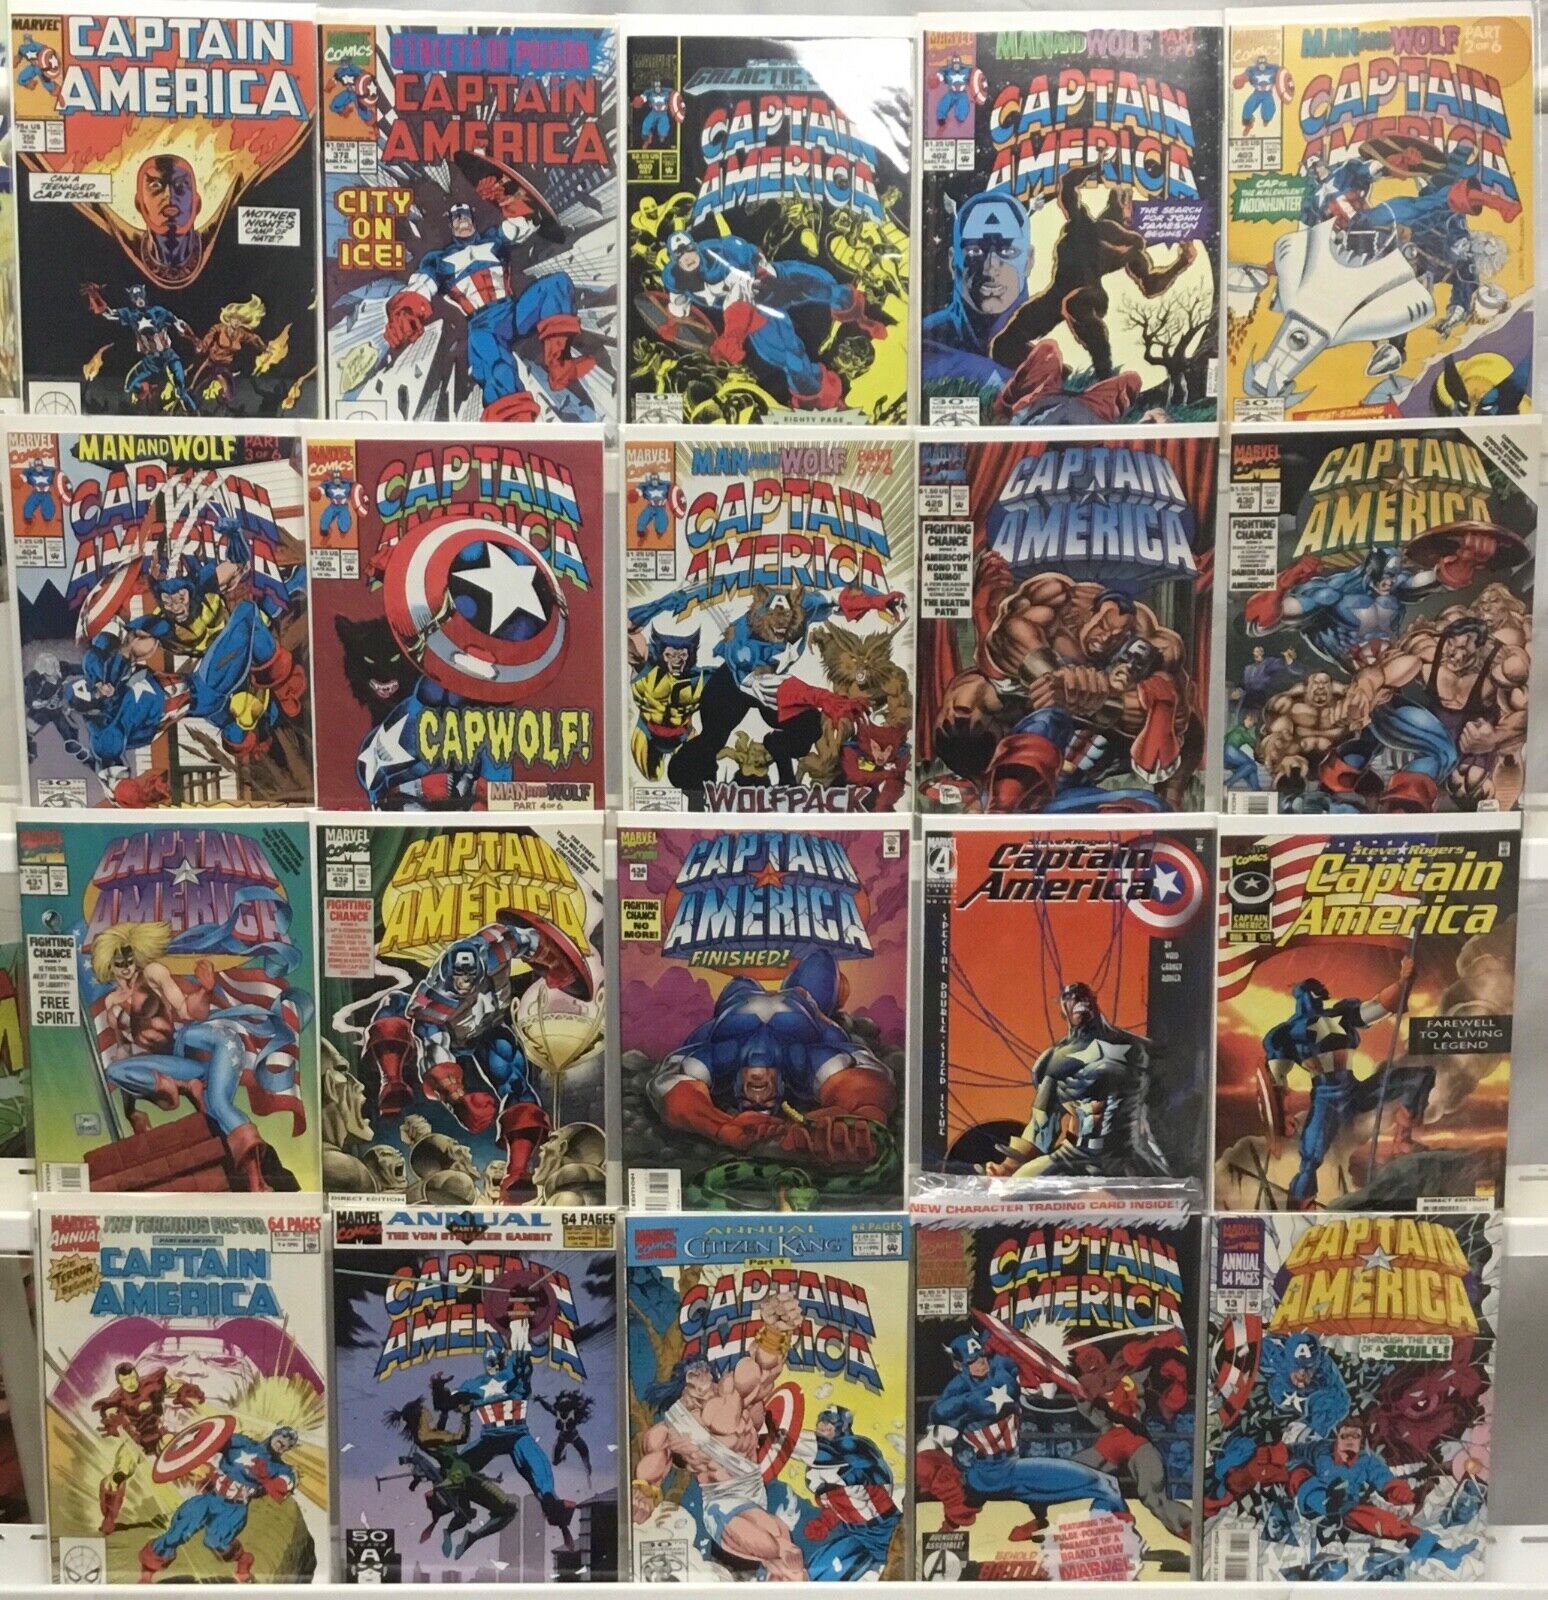 Marvel Comics - Captain America 1st Series - Comic Book Lot of 20 Issues